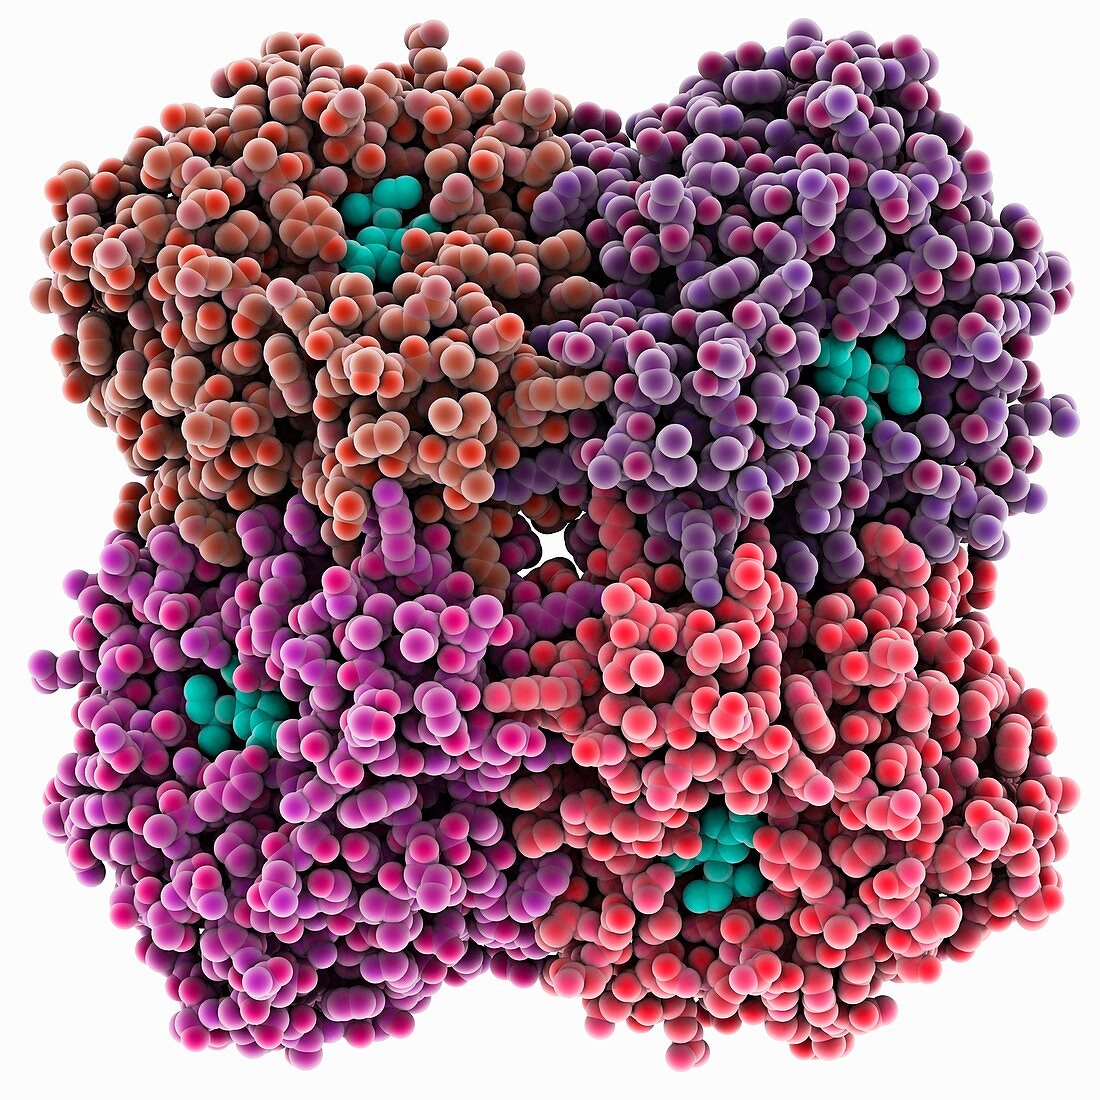 Flu virus surface protein and drug